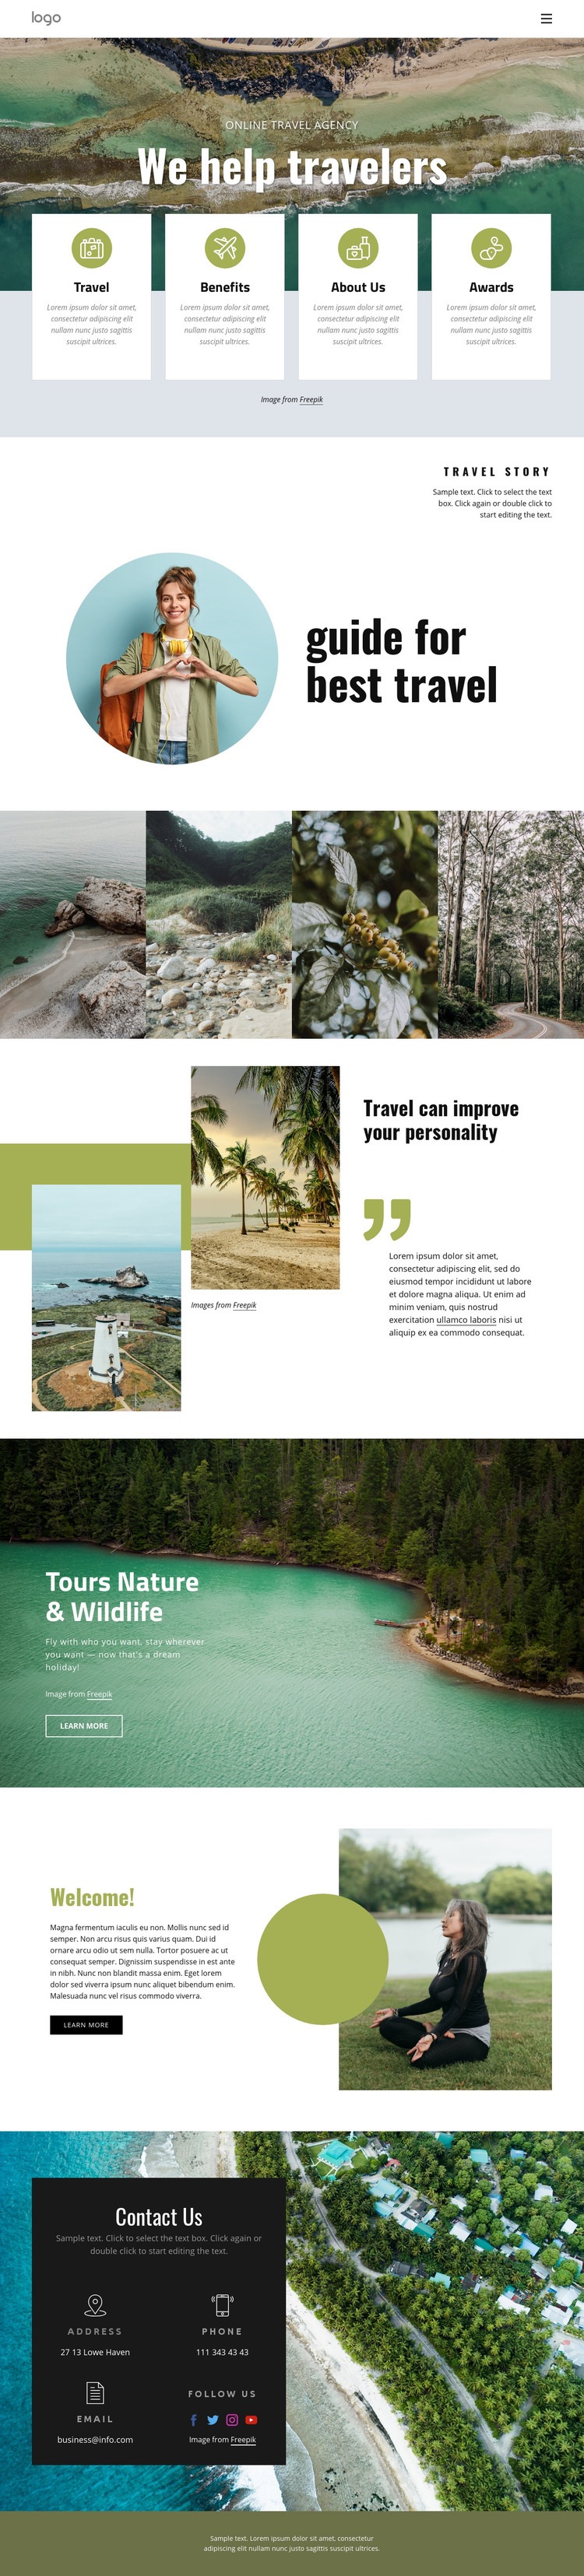 We help manage your trip Web Page Design